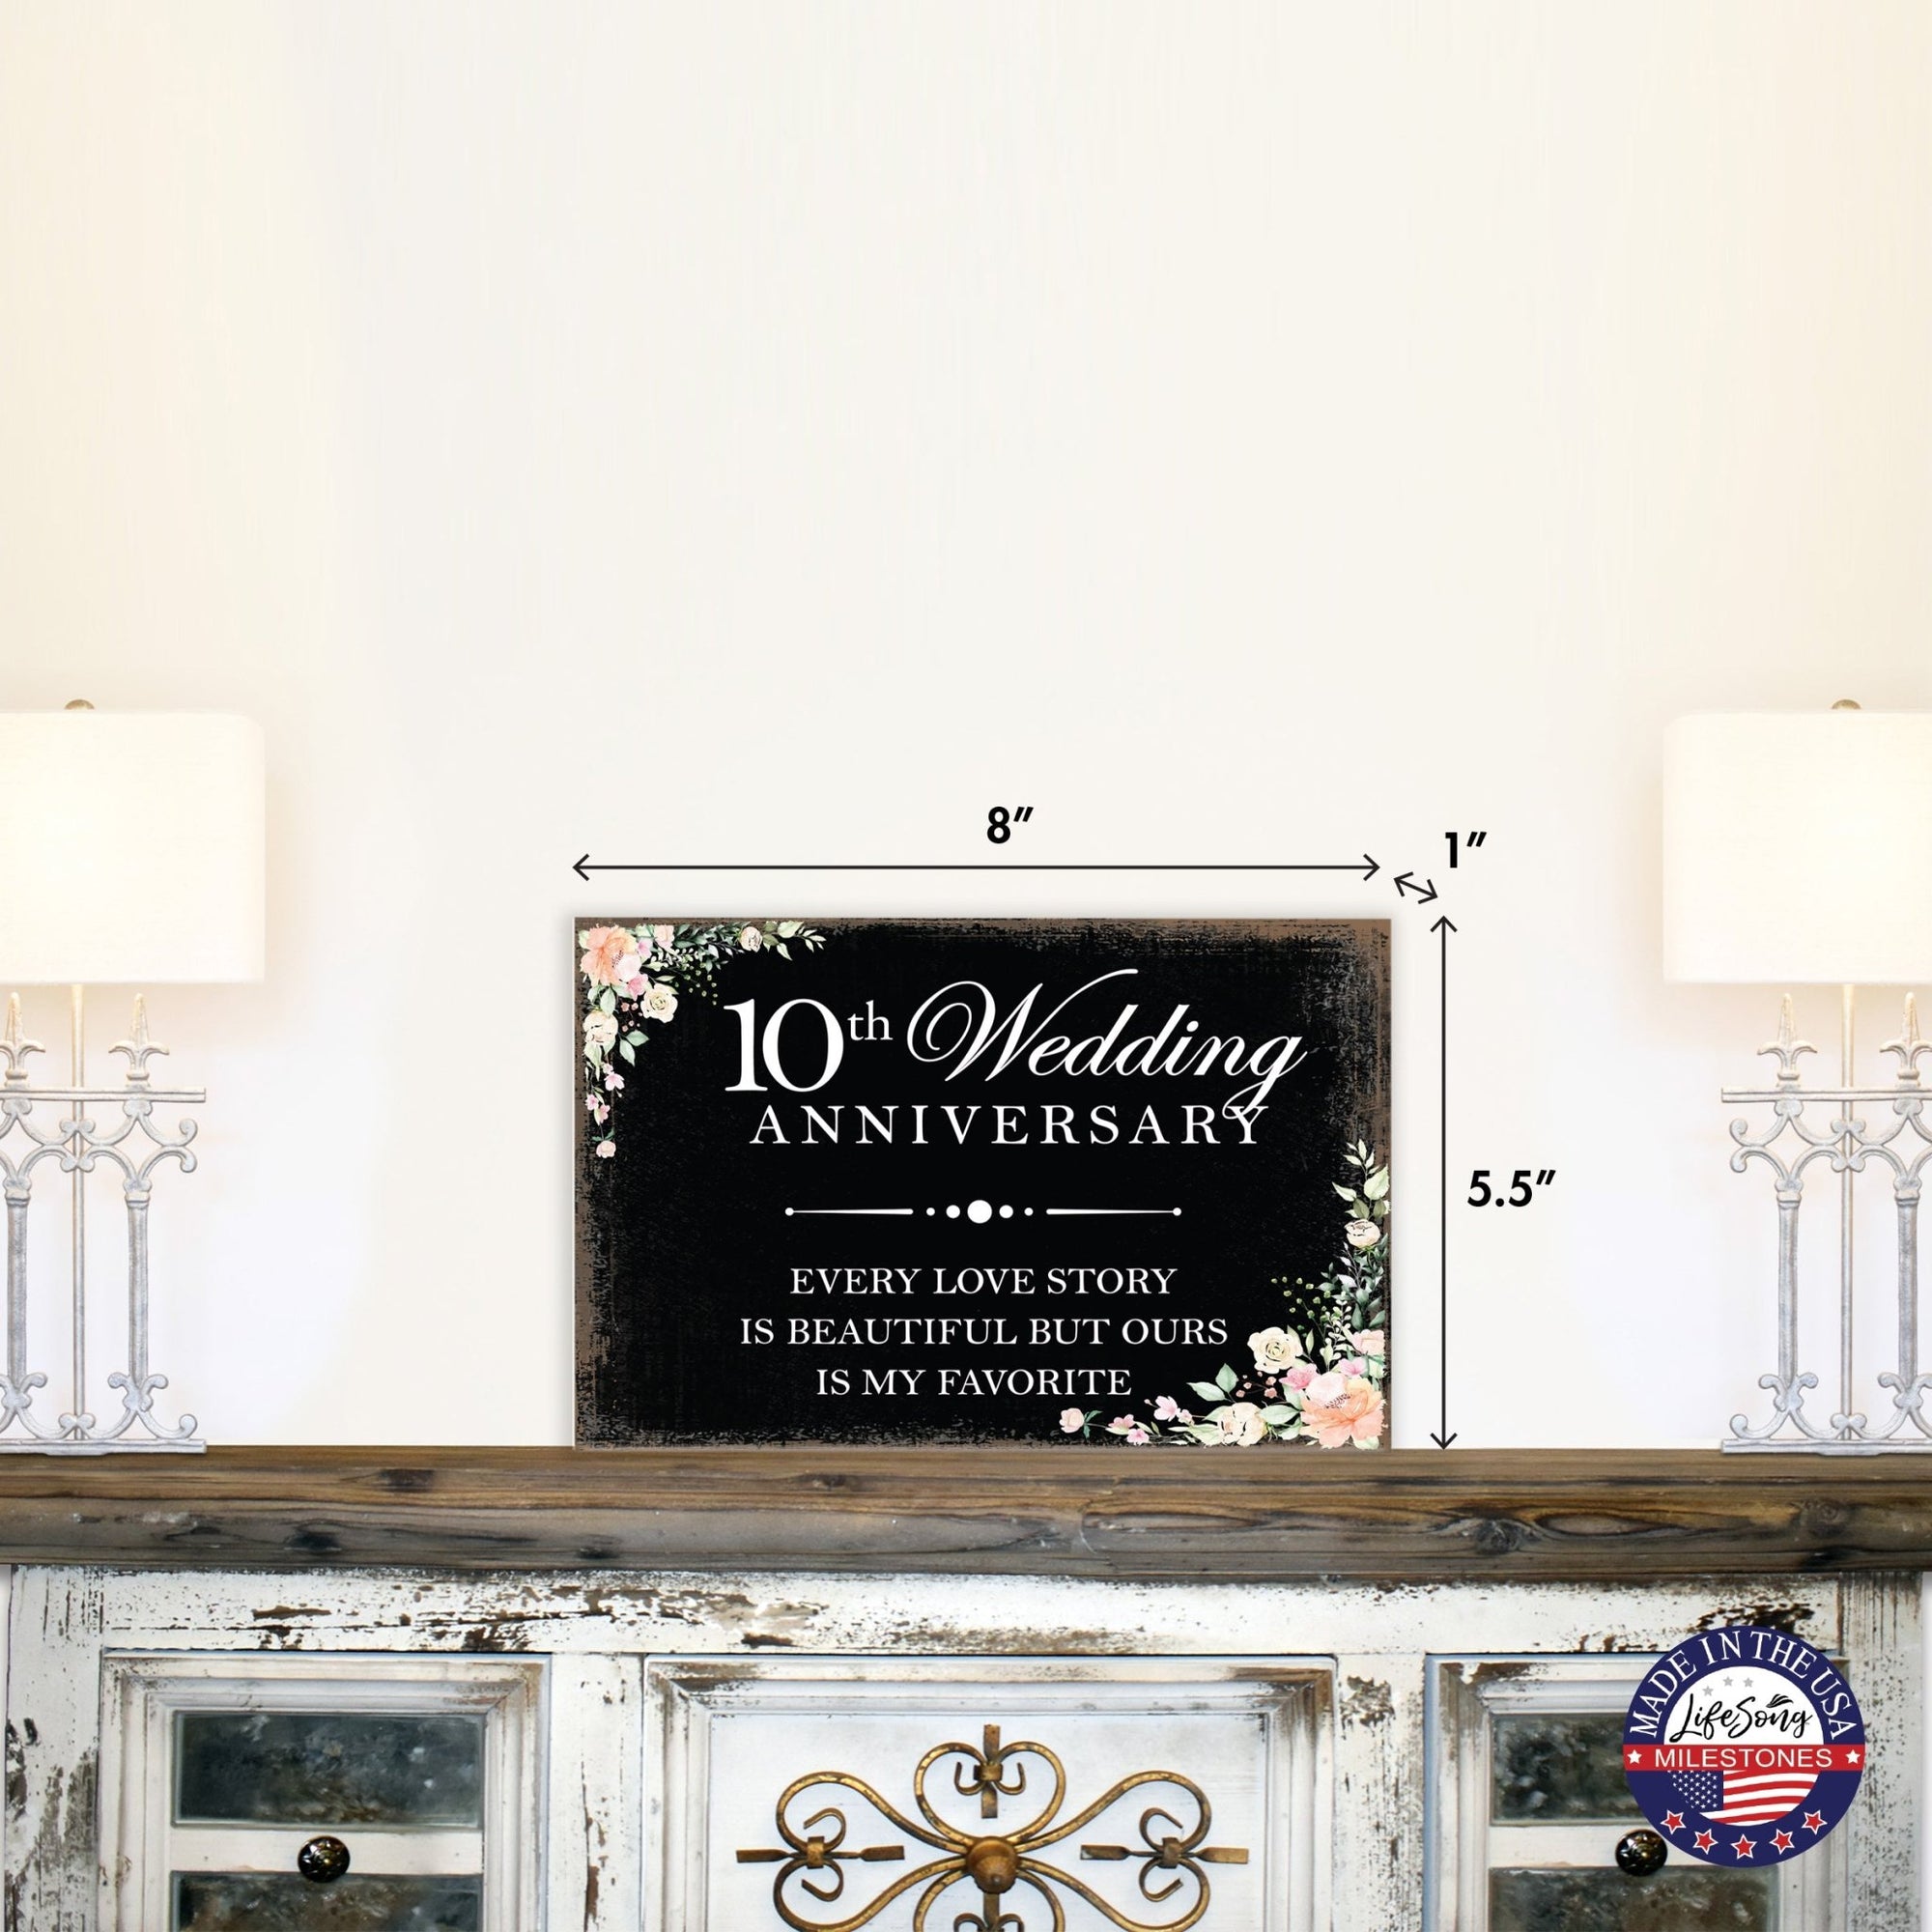 10th Wedding Anniversary Unique Shelf Decor and Tabletop Signs Gifts for Couples - Every Love Story - LifeSong Milestones